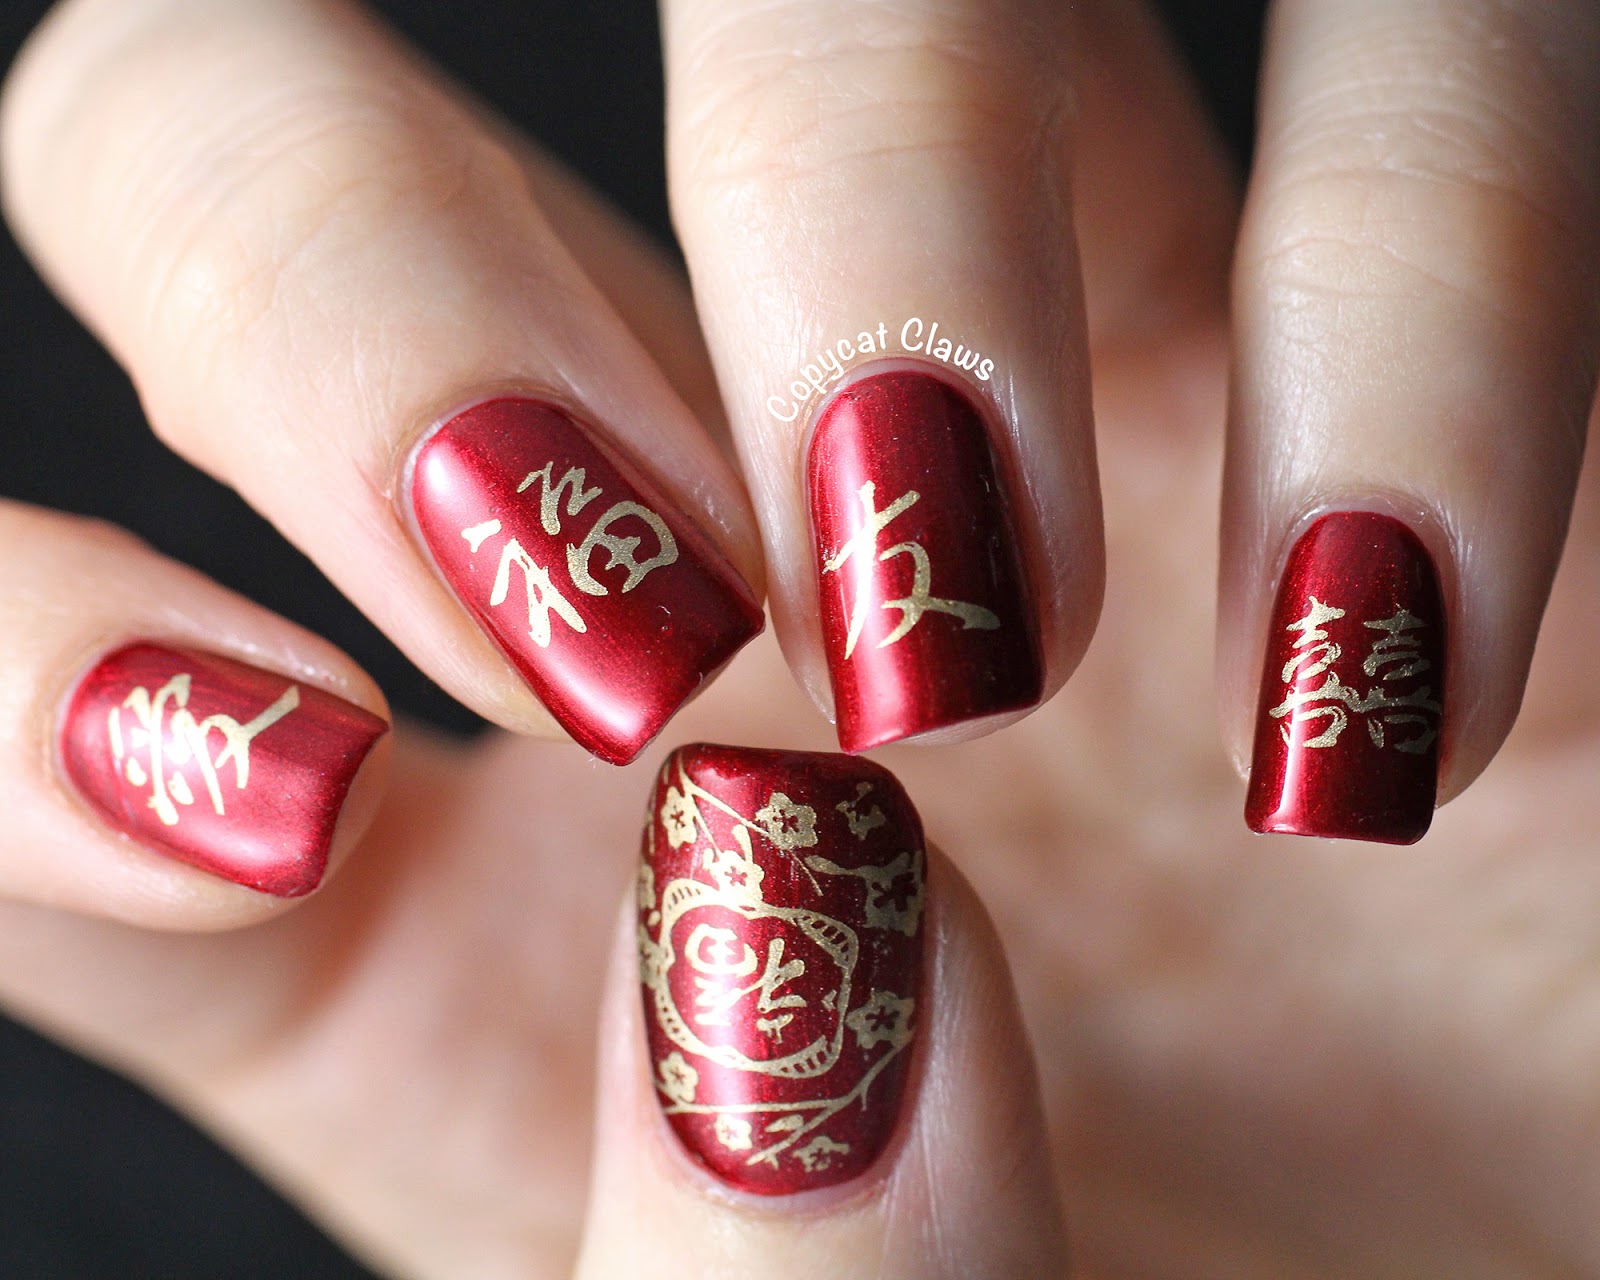 2. Festive New Year's Nail Designs on Tumblr - wide 8